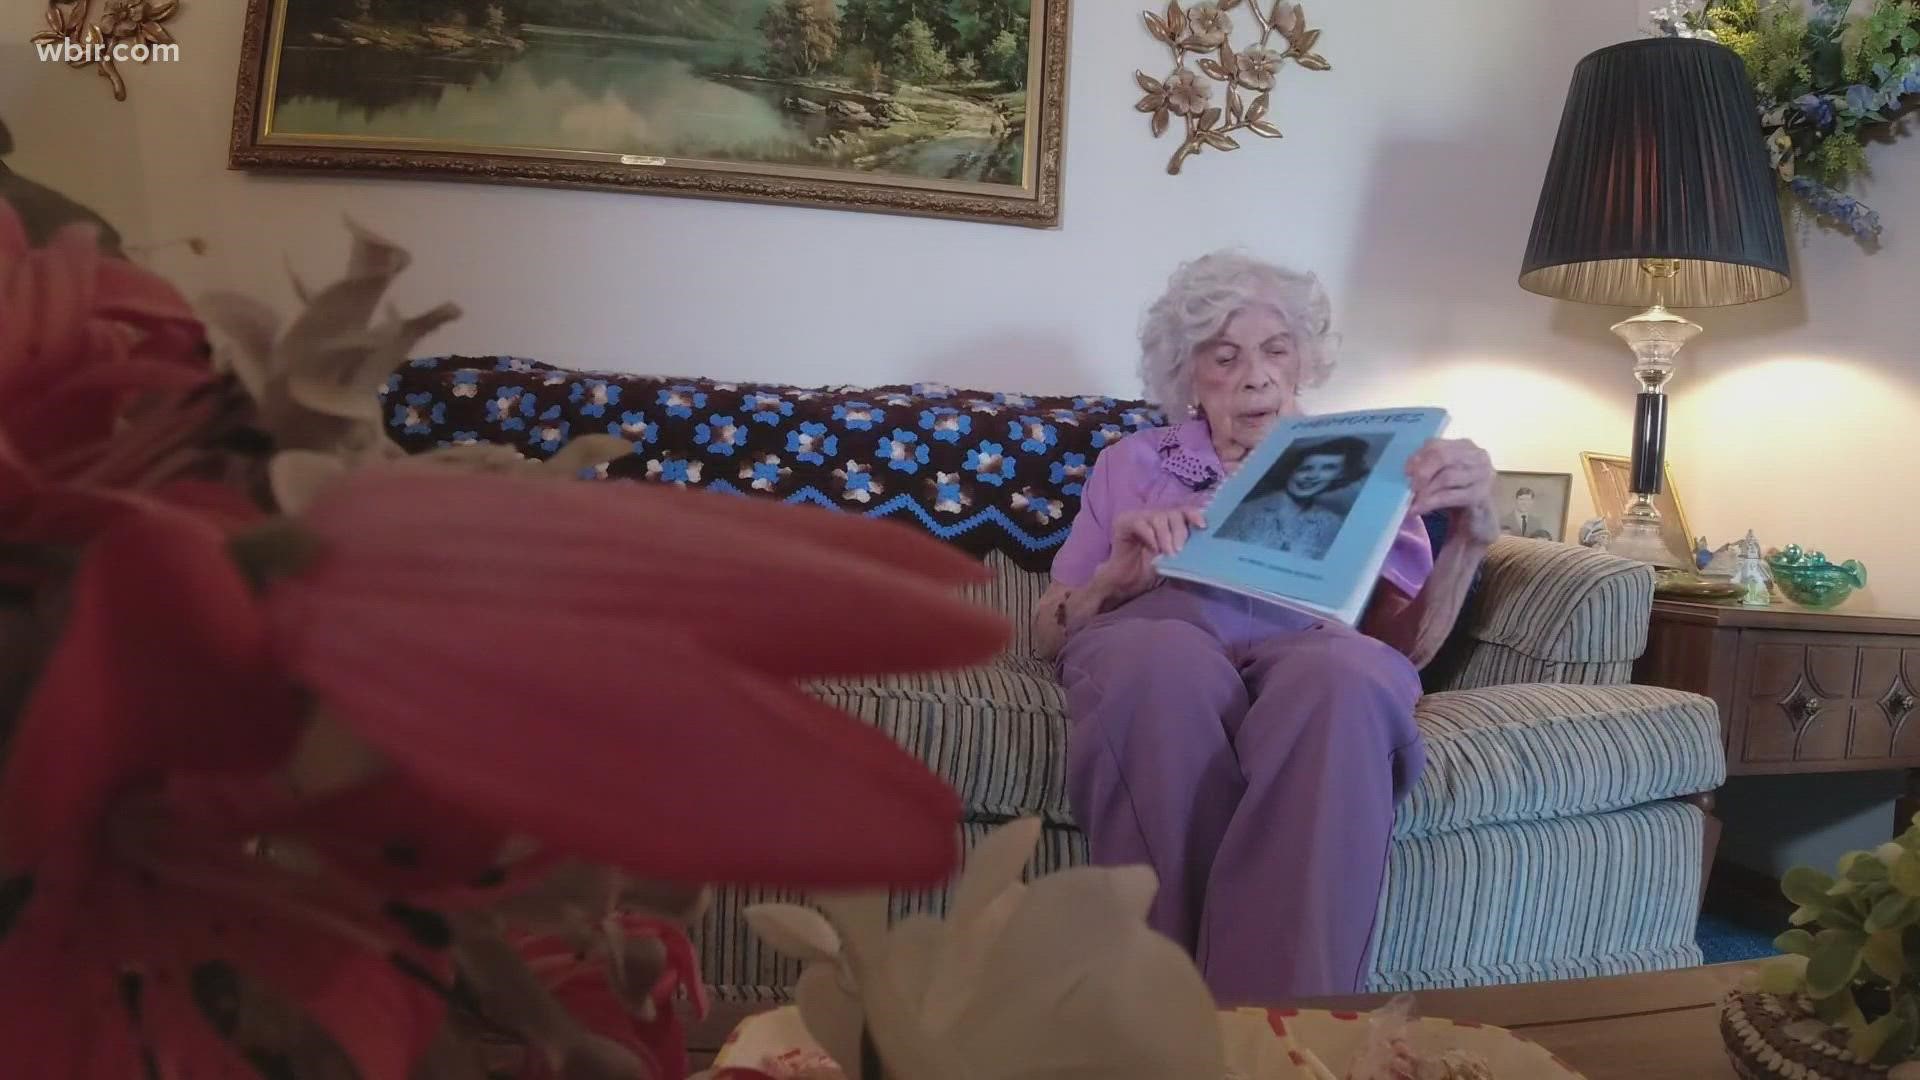 Mona Beckner turns 100 on January 18. She's lived a storied life full of love, laughter and history.